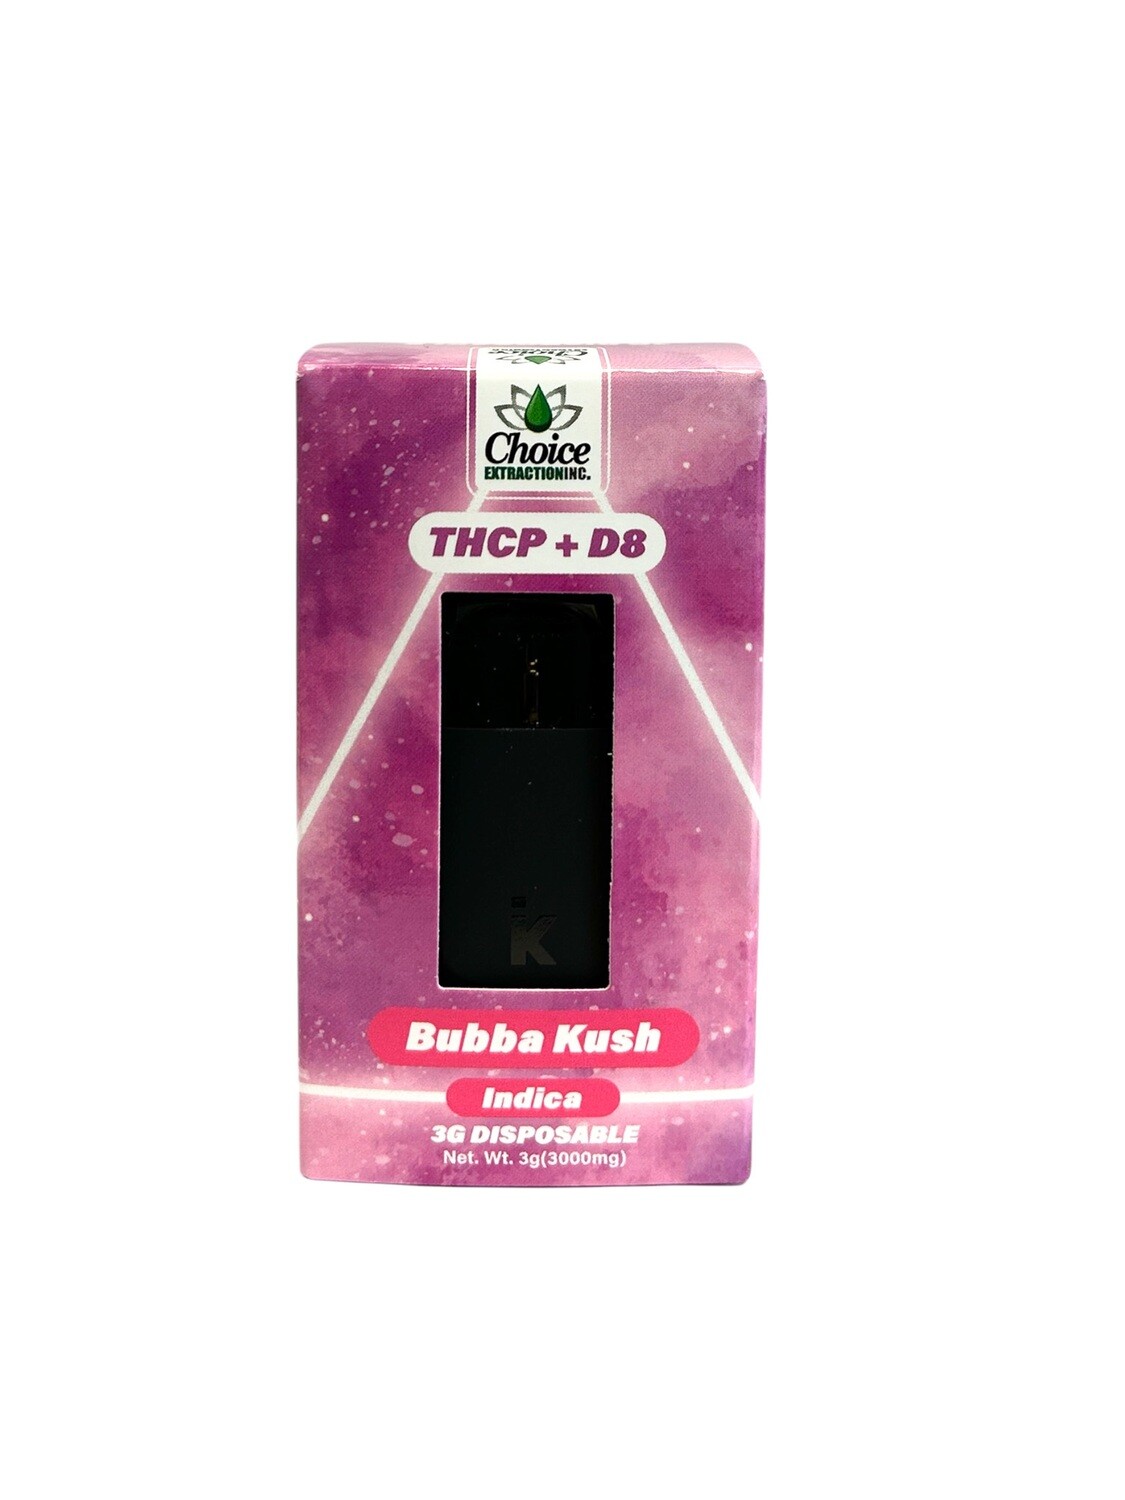 THCP + D8 Disposable - Bubba Kush 3mL - Indica